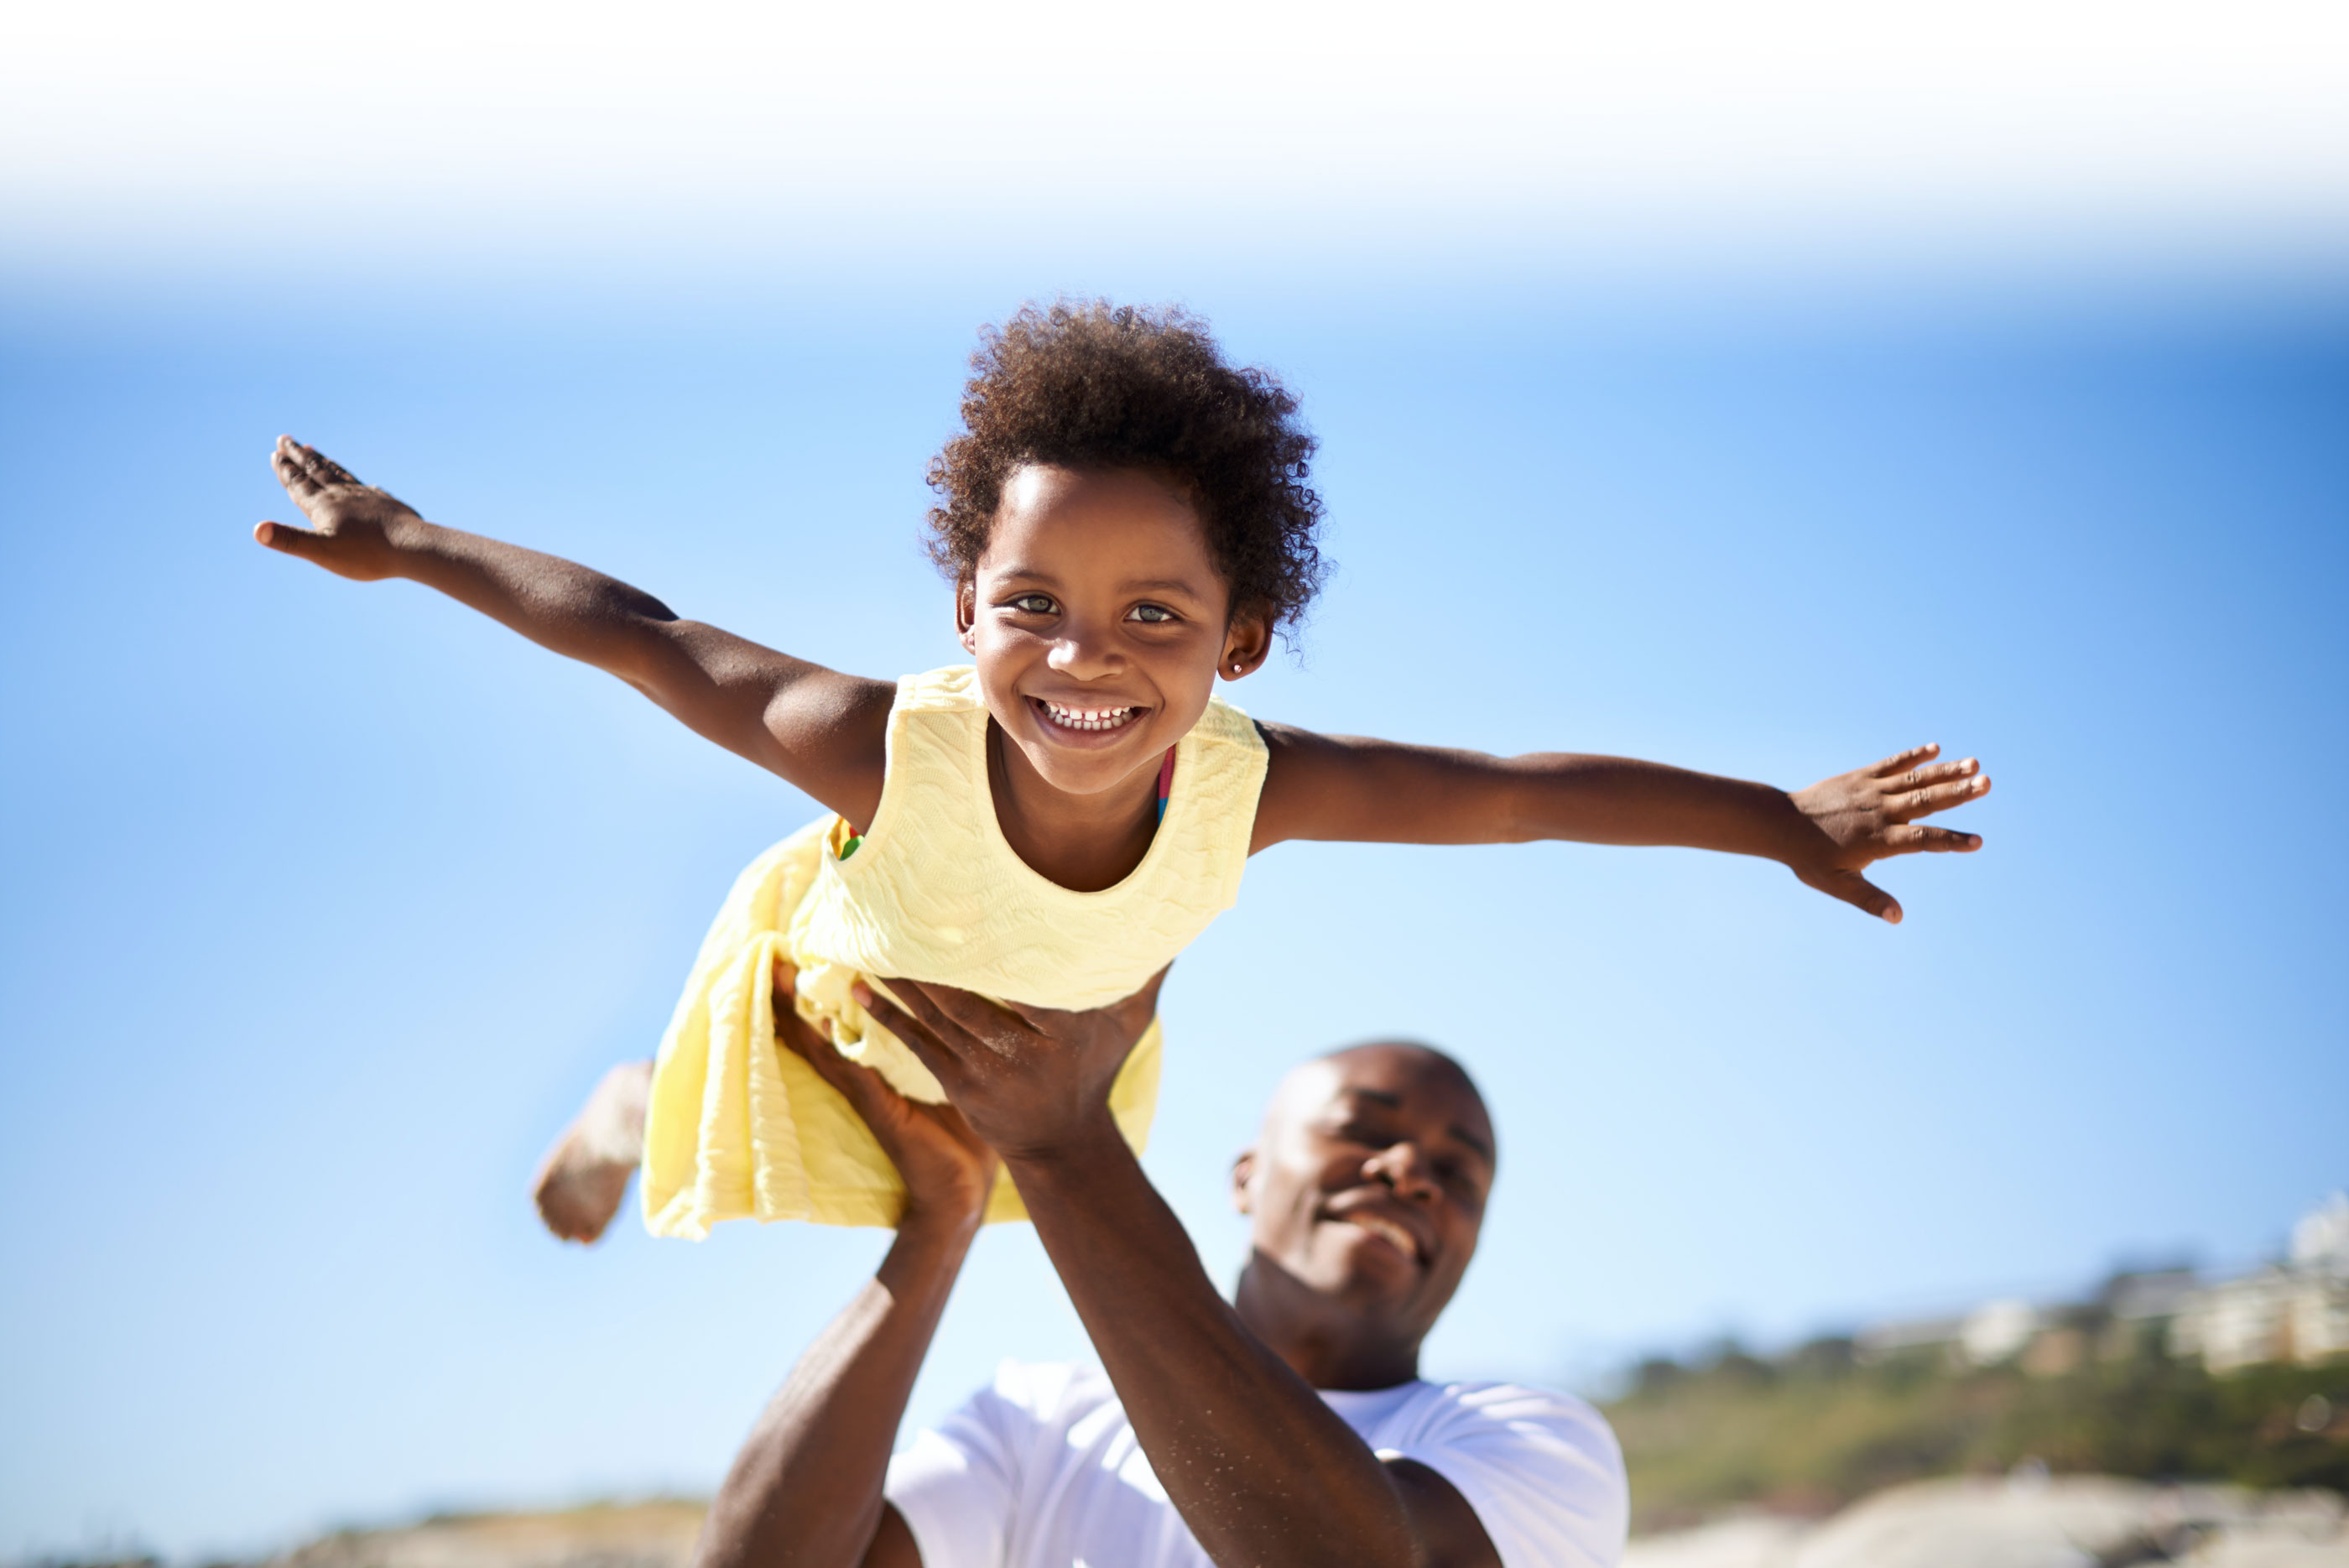 Dad holding up daughter in flying pose with clear sky background